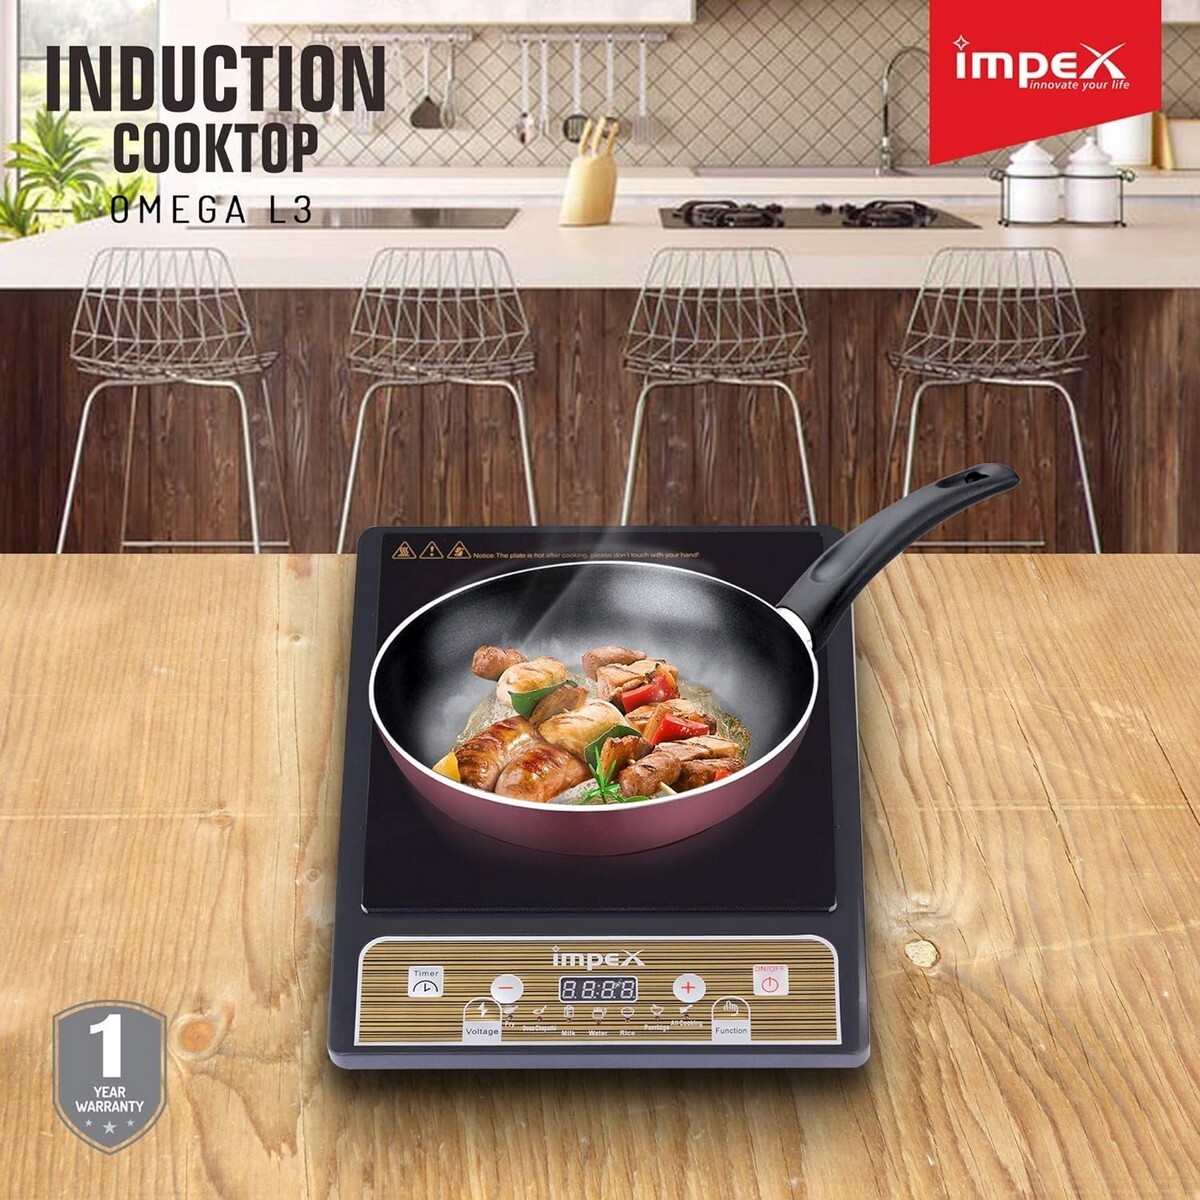 Impex Induction Cooktop Omega L3